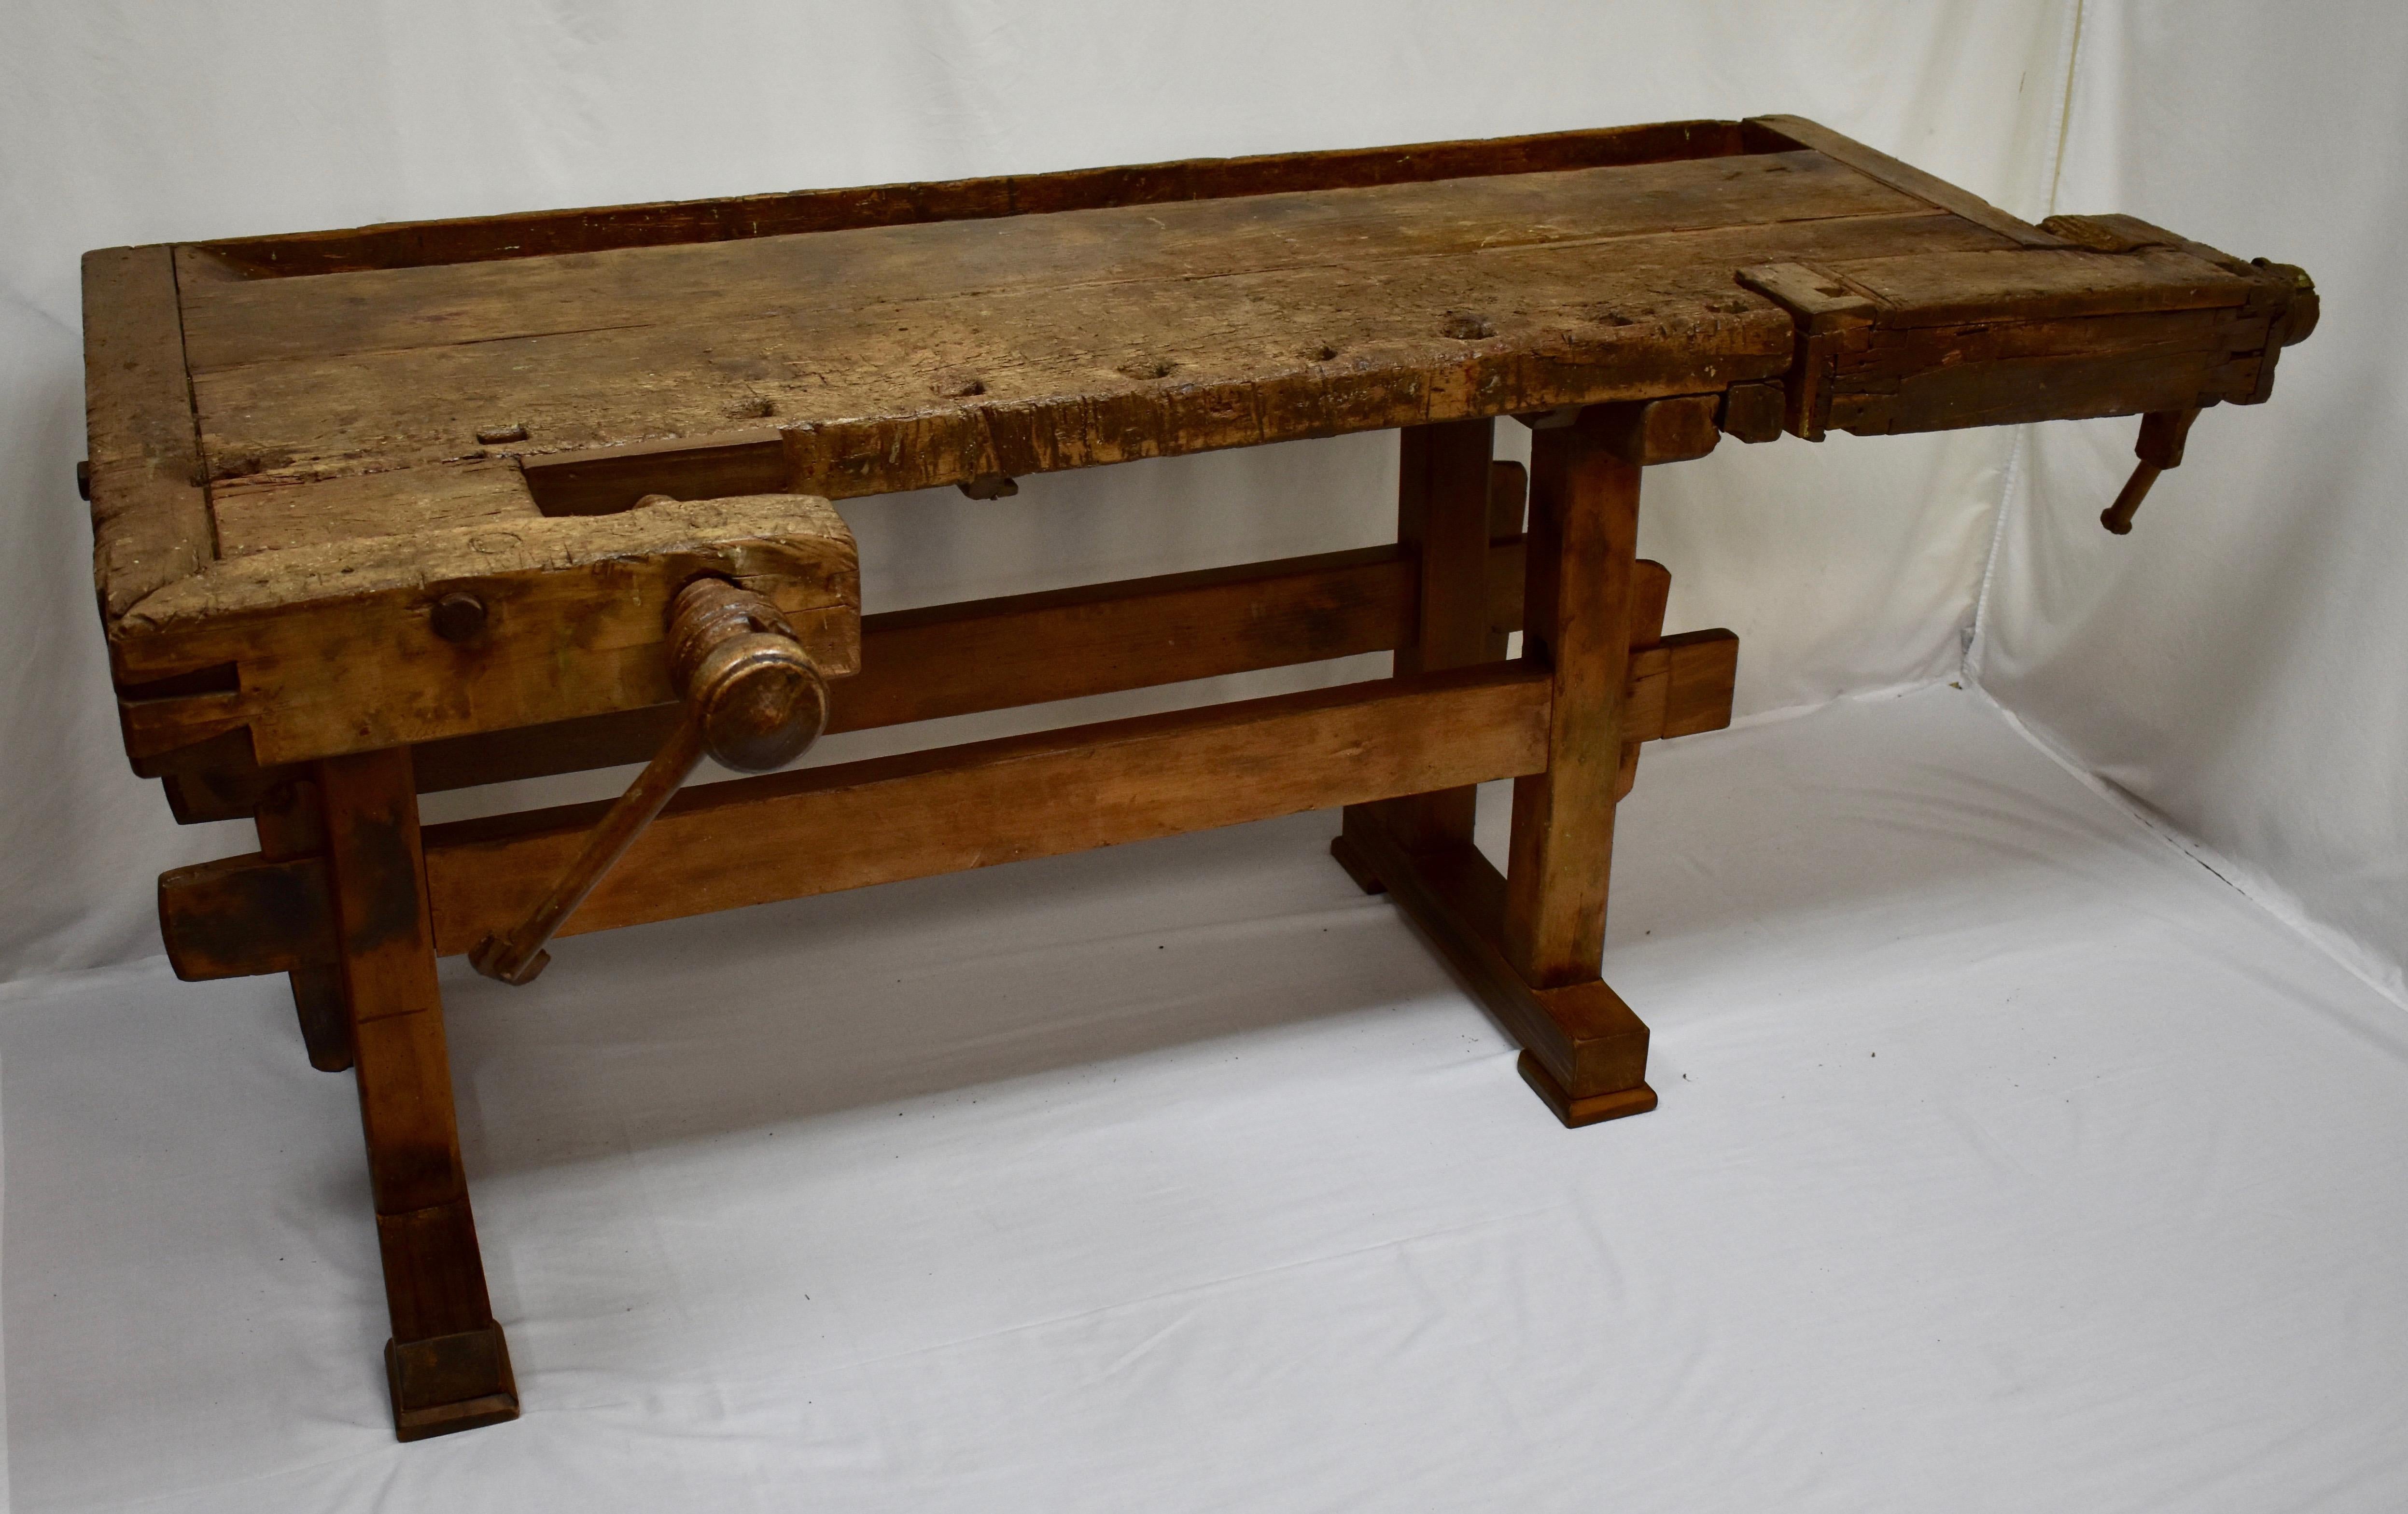 This is a magnificently gnarled joiner’s workbench, built as solid as a rock. The trestle-style base is made entirely of oak. The uprights are 3” square, hand-cut and chamfered on the corners, through-tenoned and pegged top and bottom to the